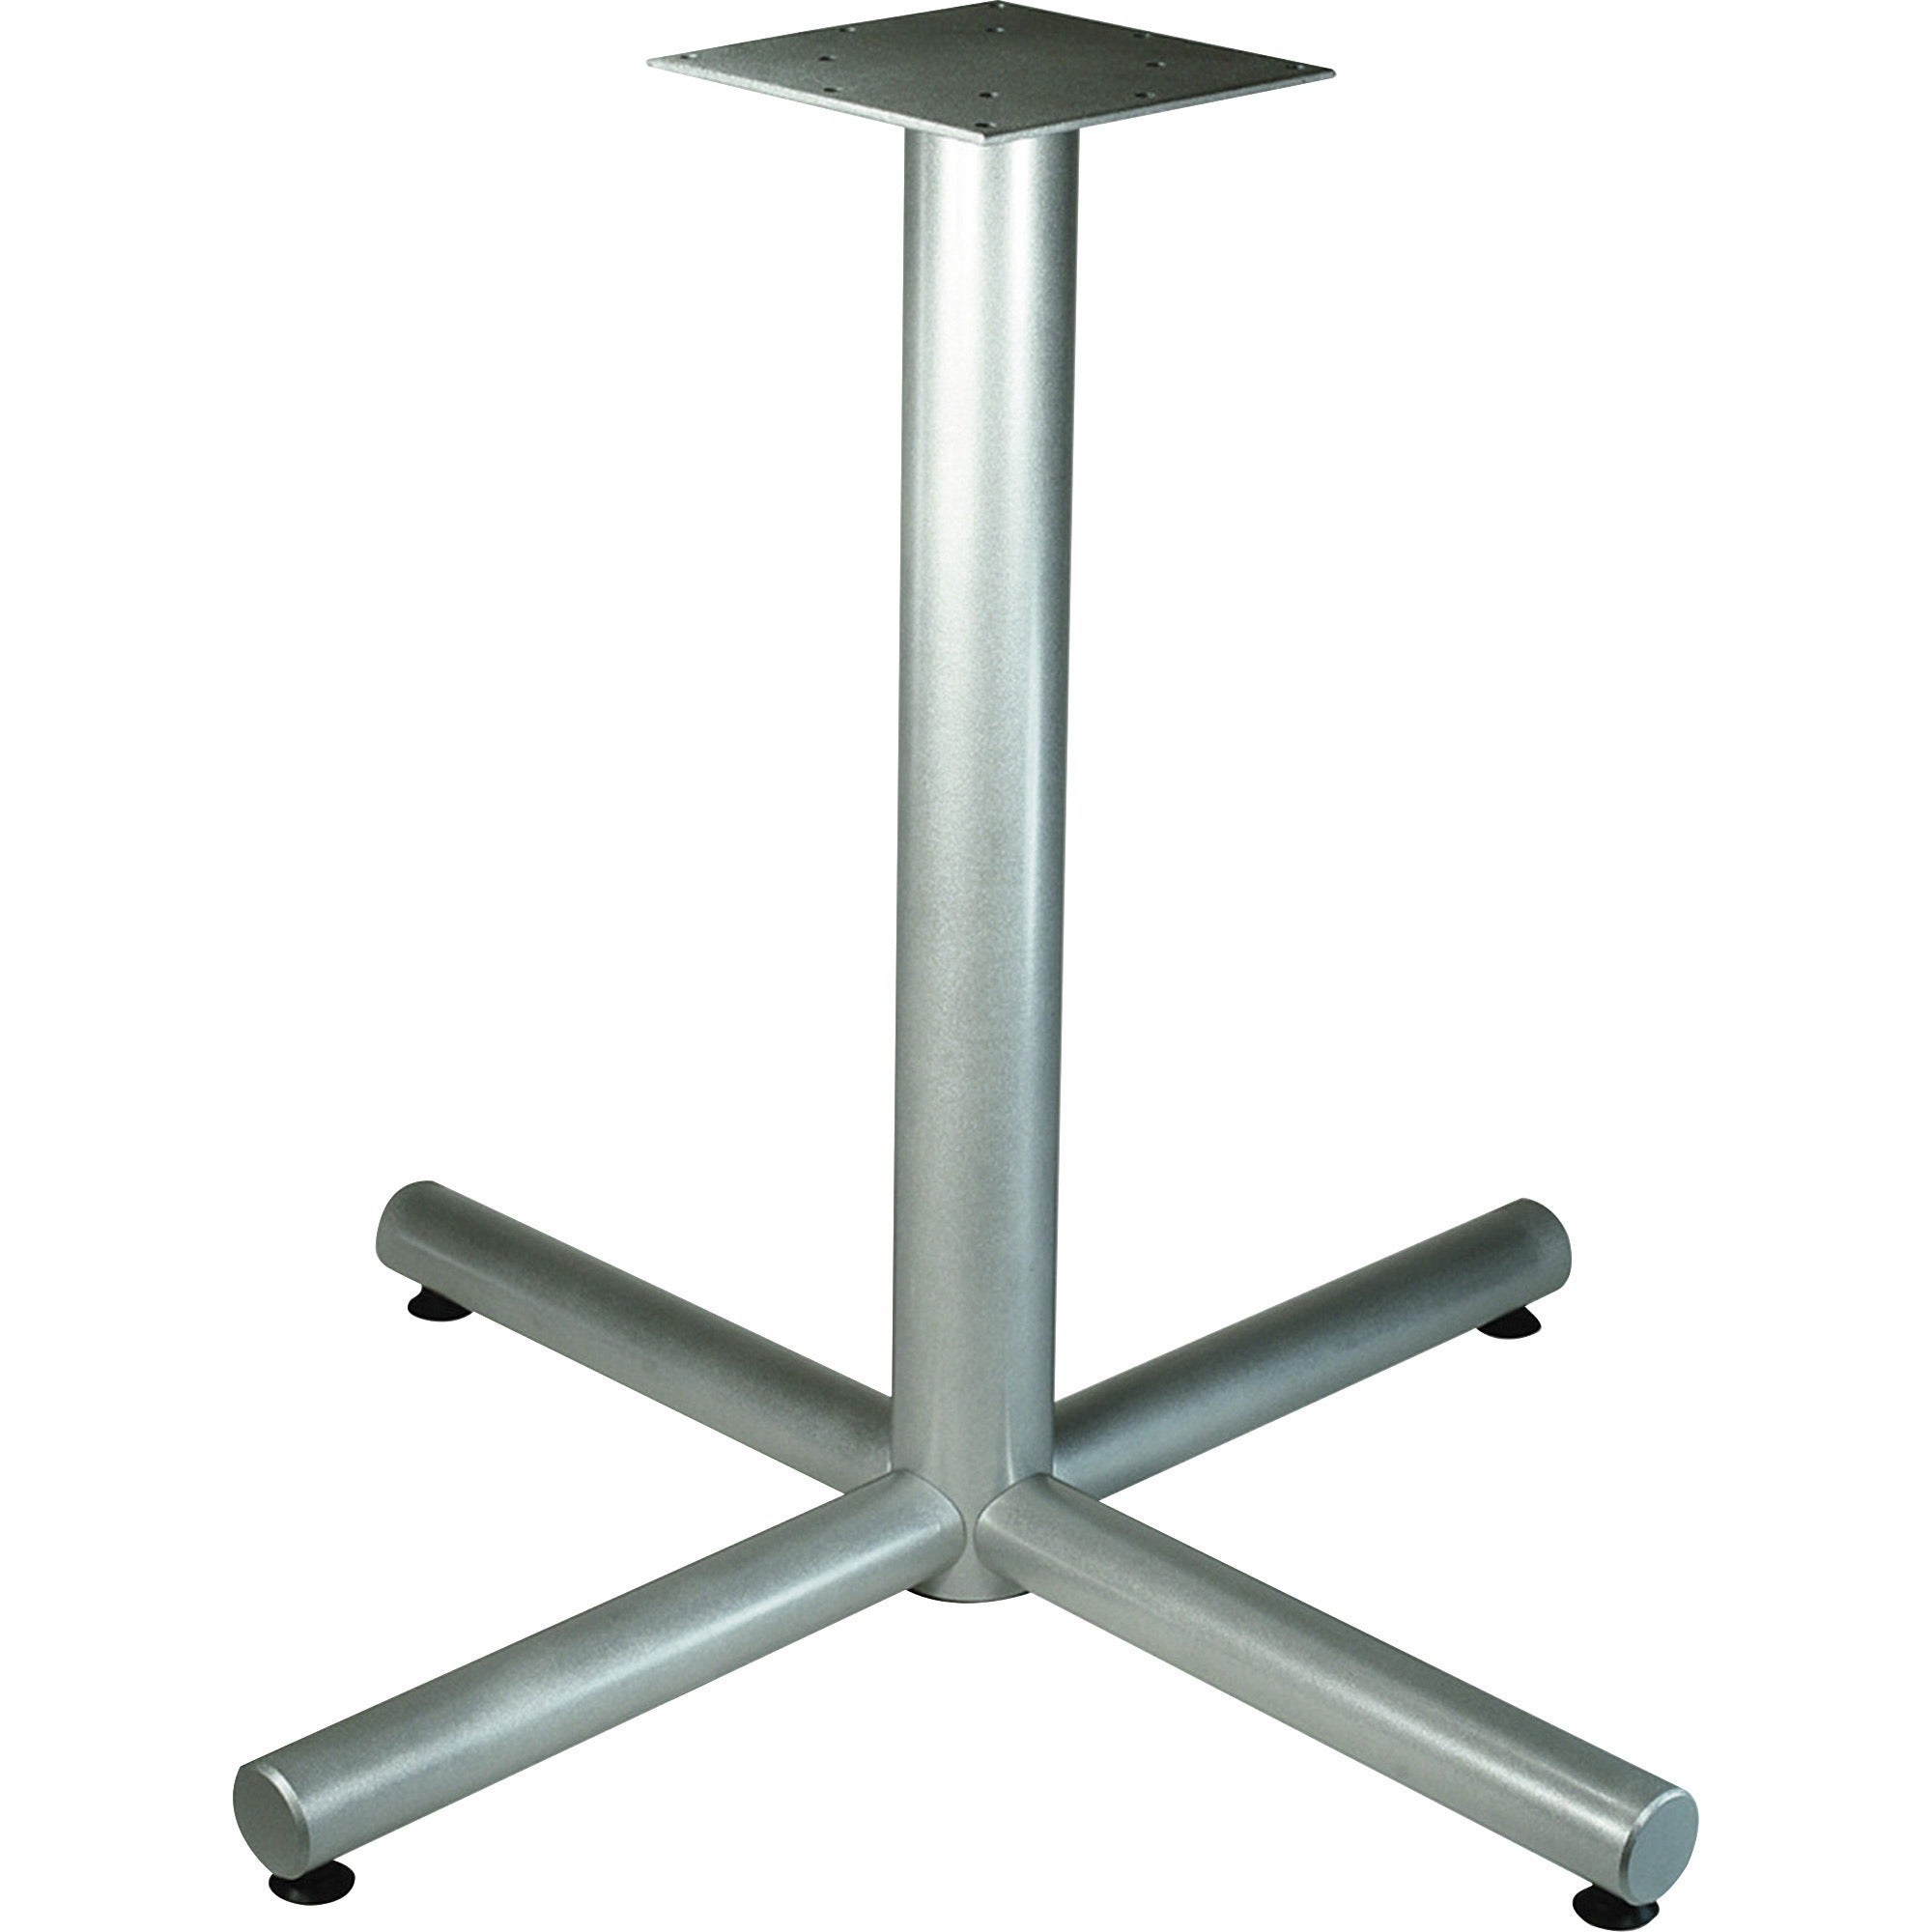 lorell-hospitality-cafe-height-table-x-leg-base-metallic-silver-x-shaped-base-30-height-x-36-width-x-36-depth-assembly-required-1-each_llr61629 - 1